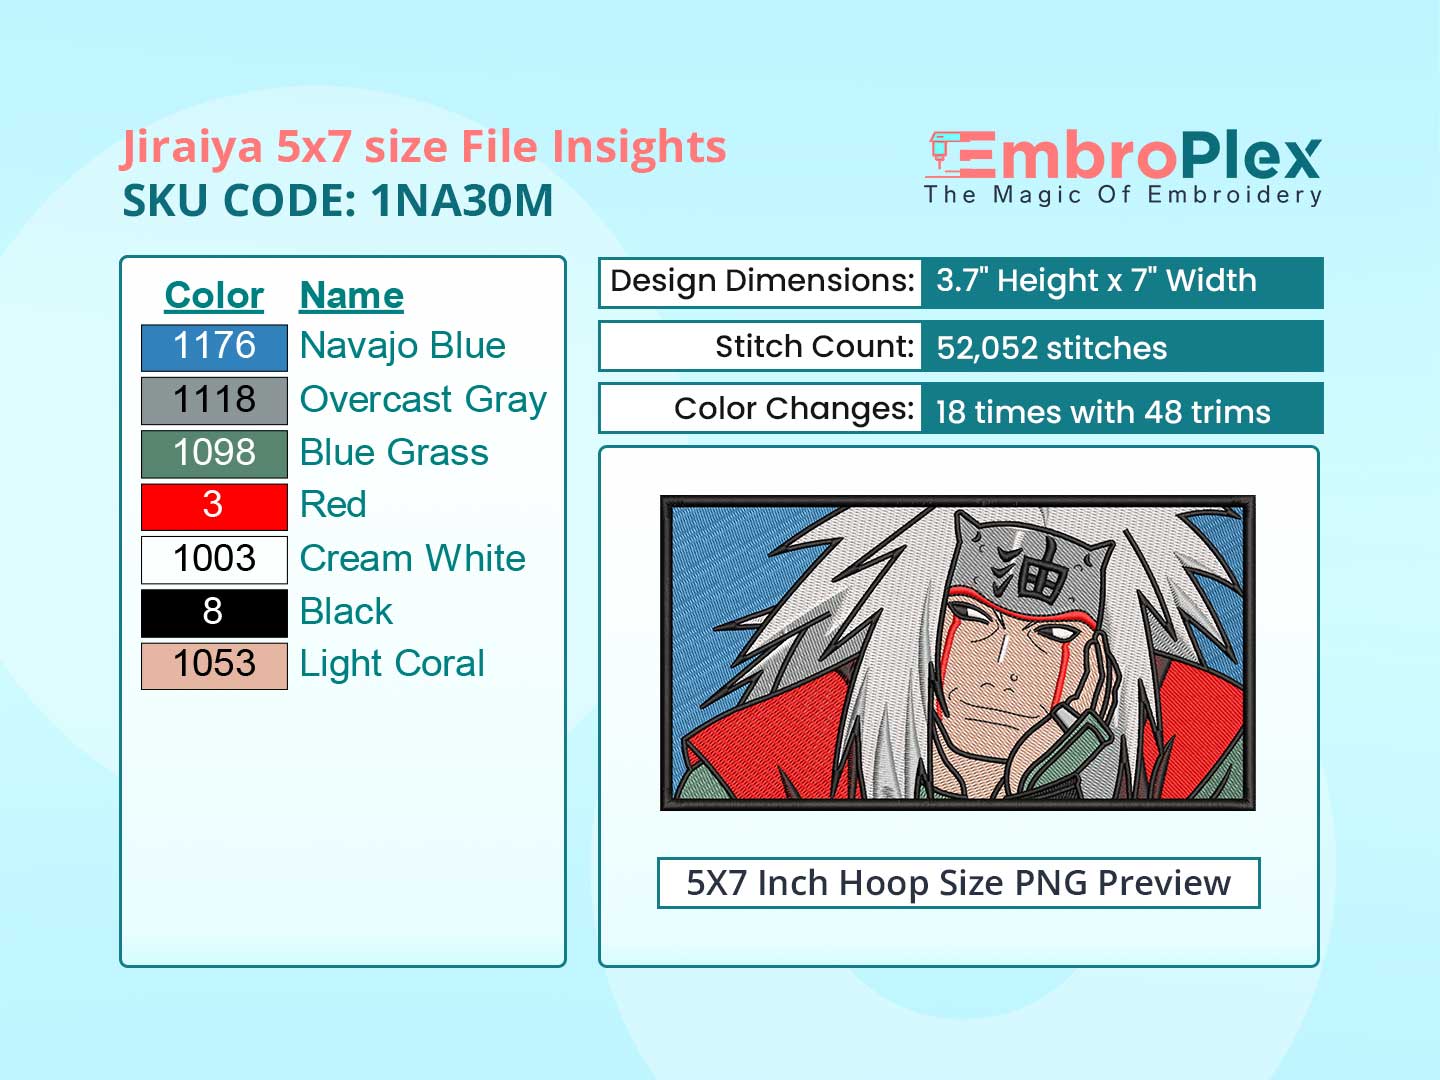 Anime-Inspired Jiraiya Embroidery Design File - 5x7 Inch hoop Size Variation overview image